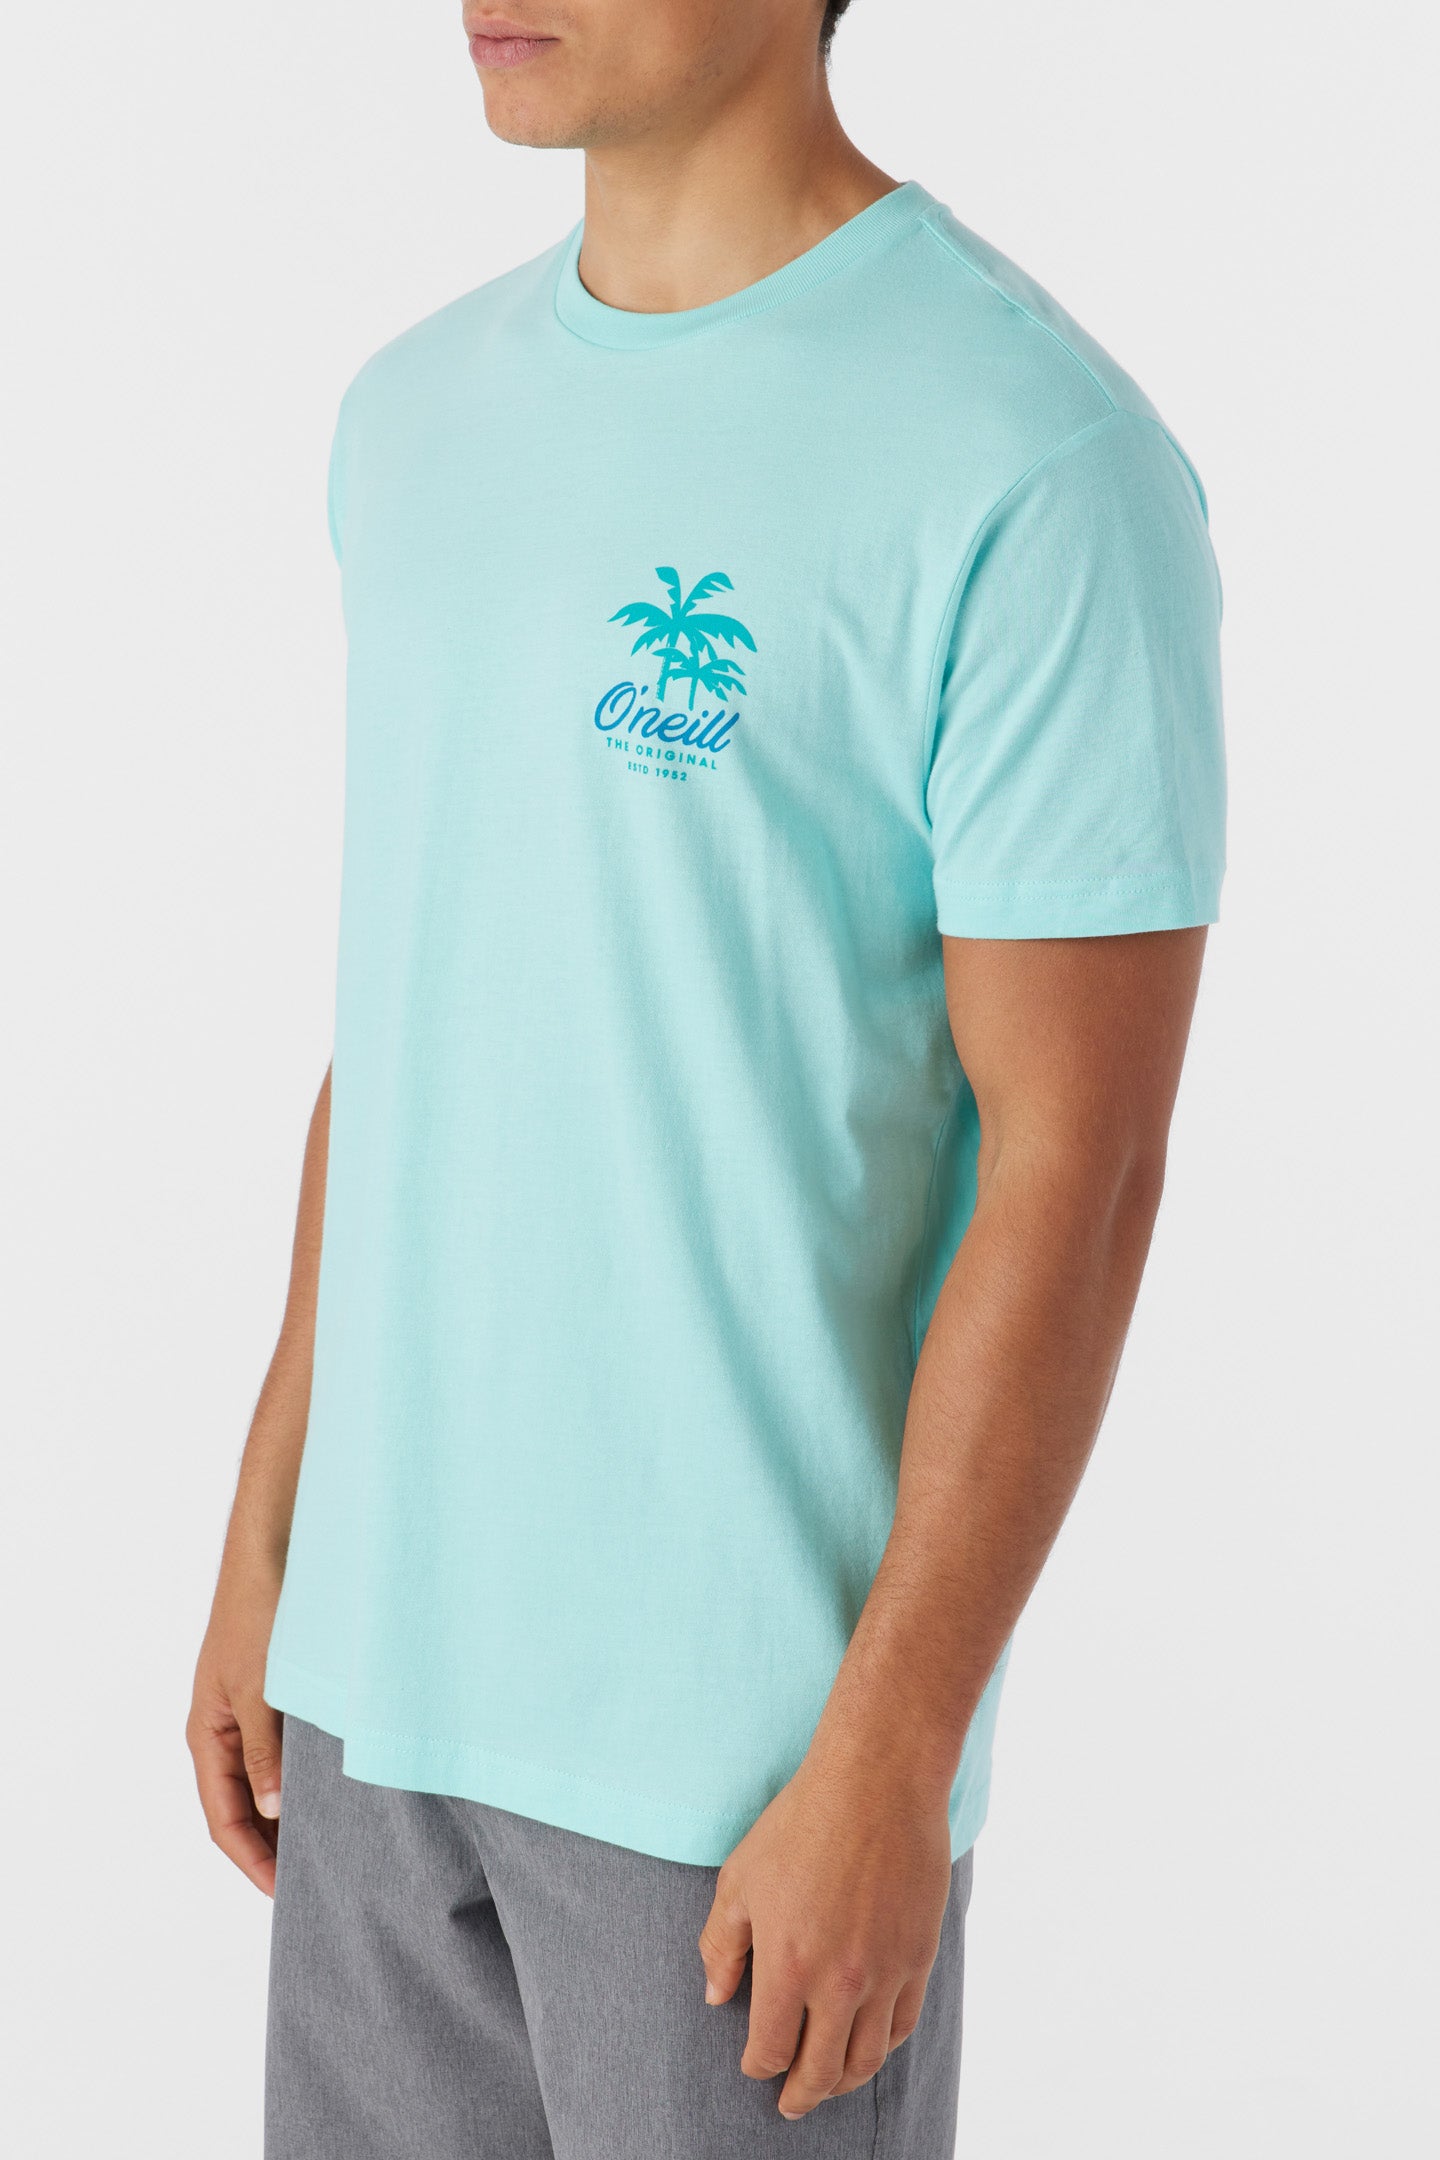 Resort Standard Fit Tee - Turquoise | O'Neill